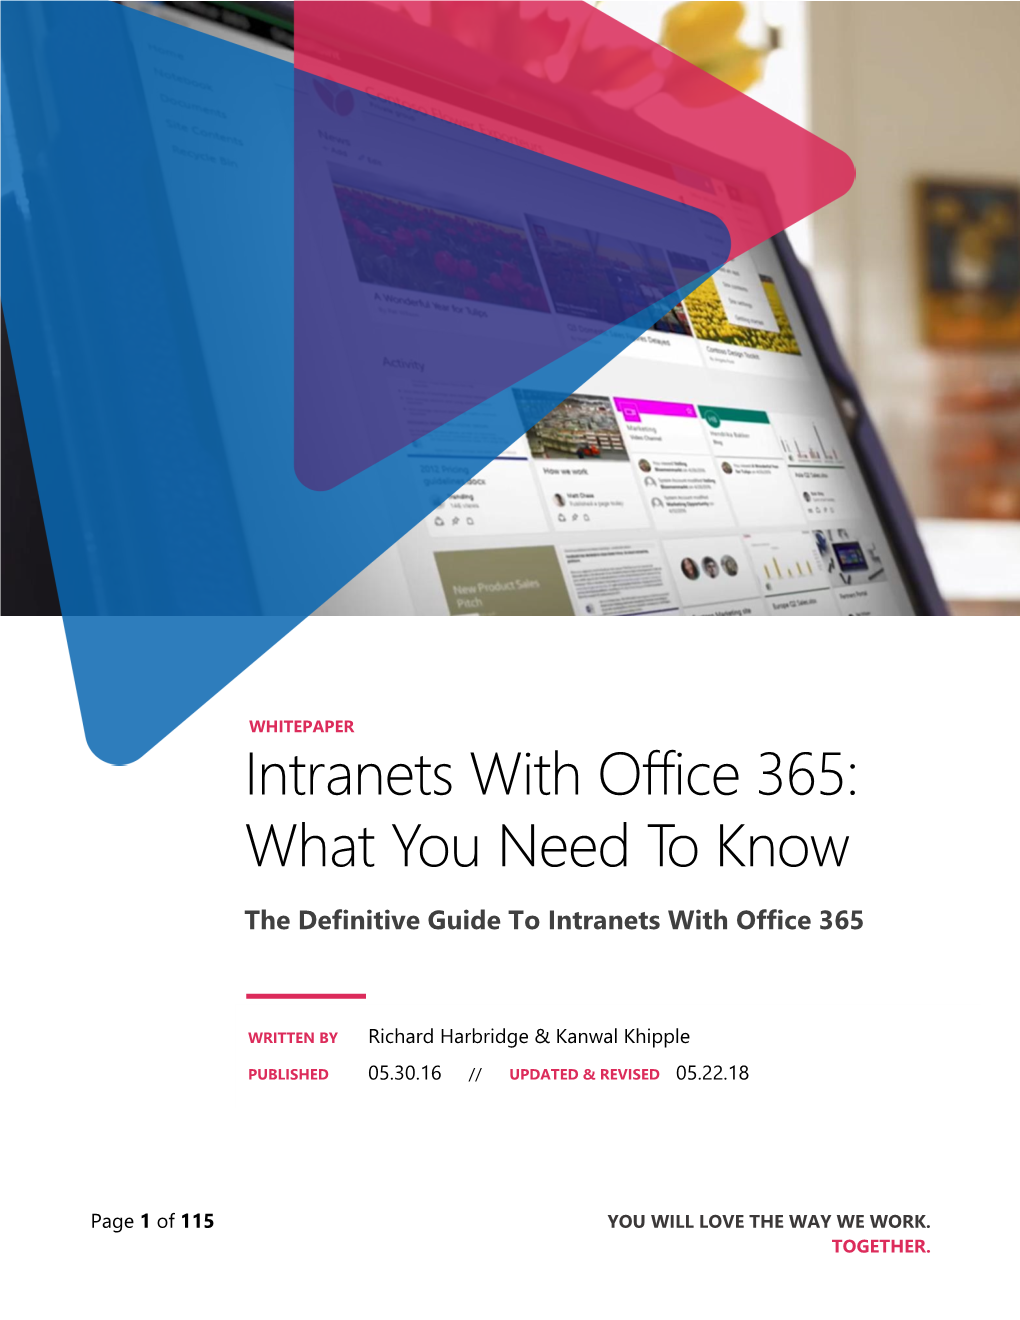 Intranets with Office 365: What You Need to Know